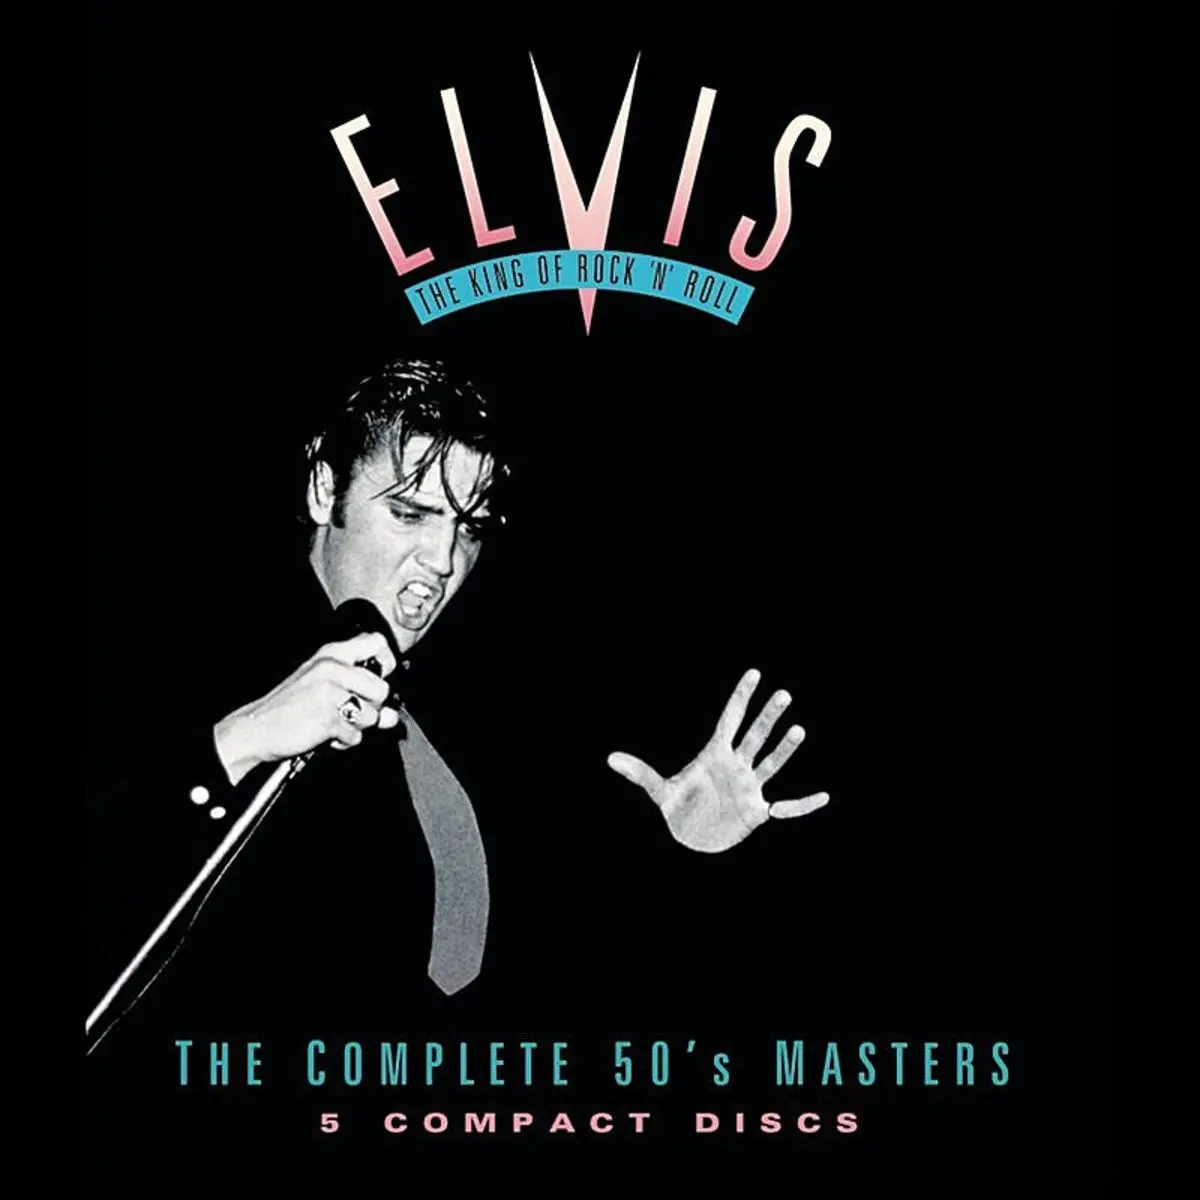 My Happiness Lyrics In English The King Of Rock N Roll The Complete 50 S Masters My Happiness Song Lyrics In English Free Online On Gaana Com